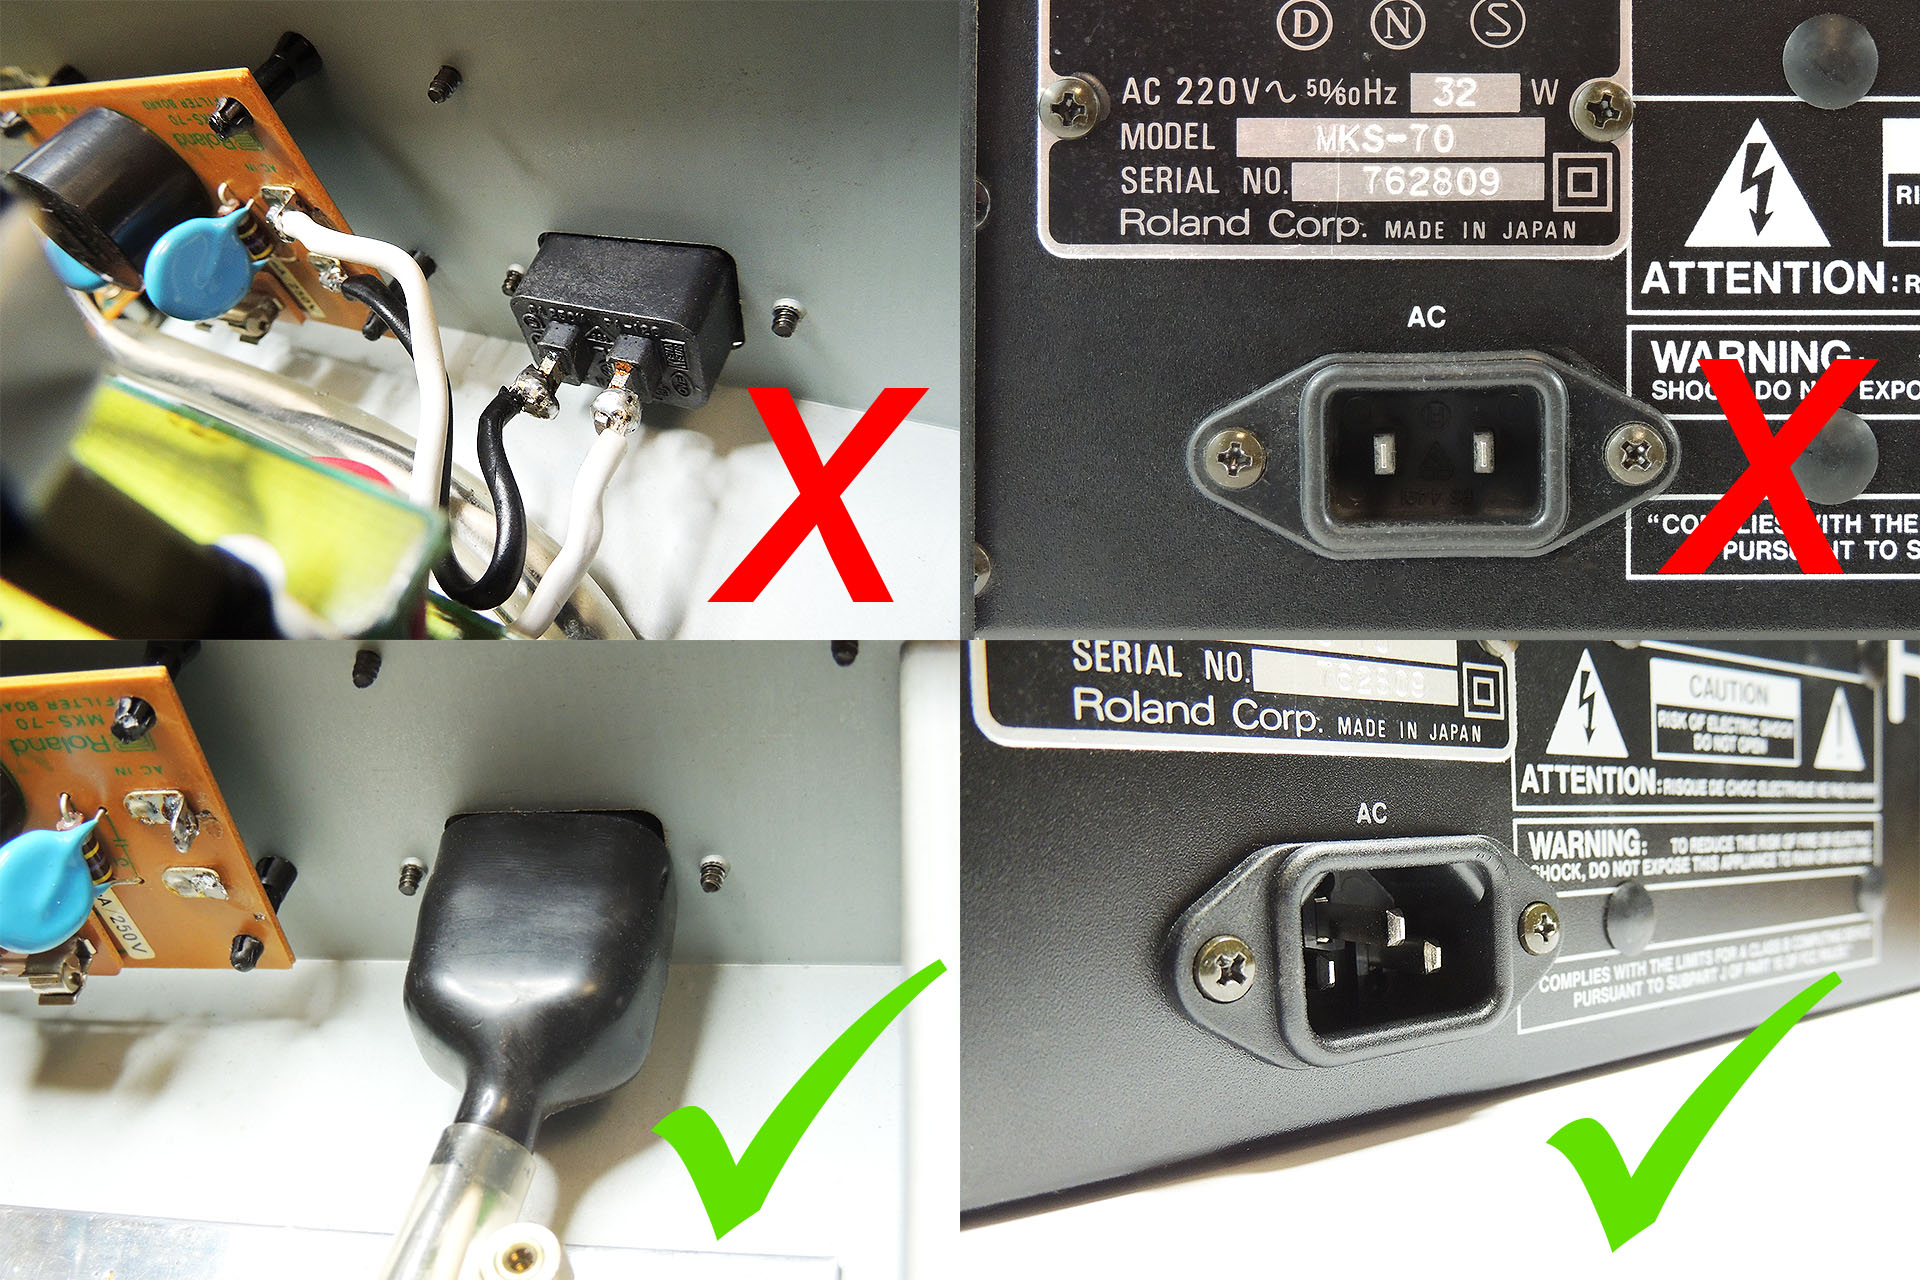 It is paramount that if fitted, a 2-pin IEC mains socket be replaced with a 3-pin IEC mains socket and that the chassis and the P0004 are connected to earth.